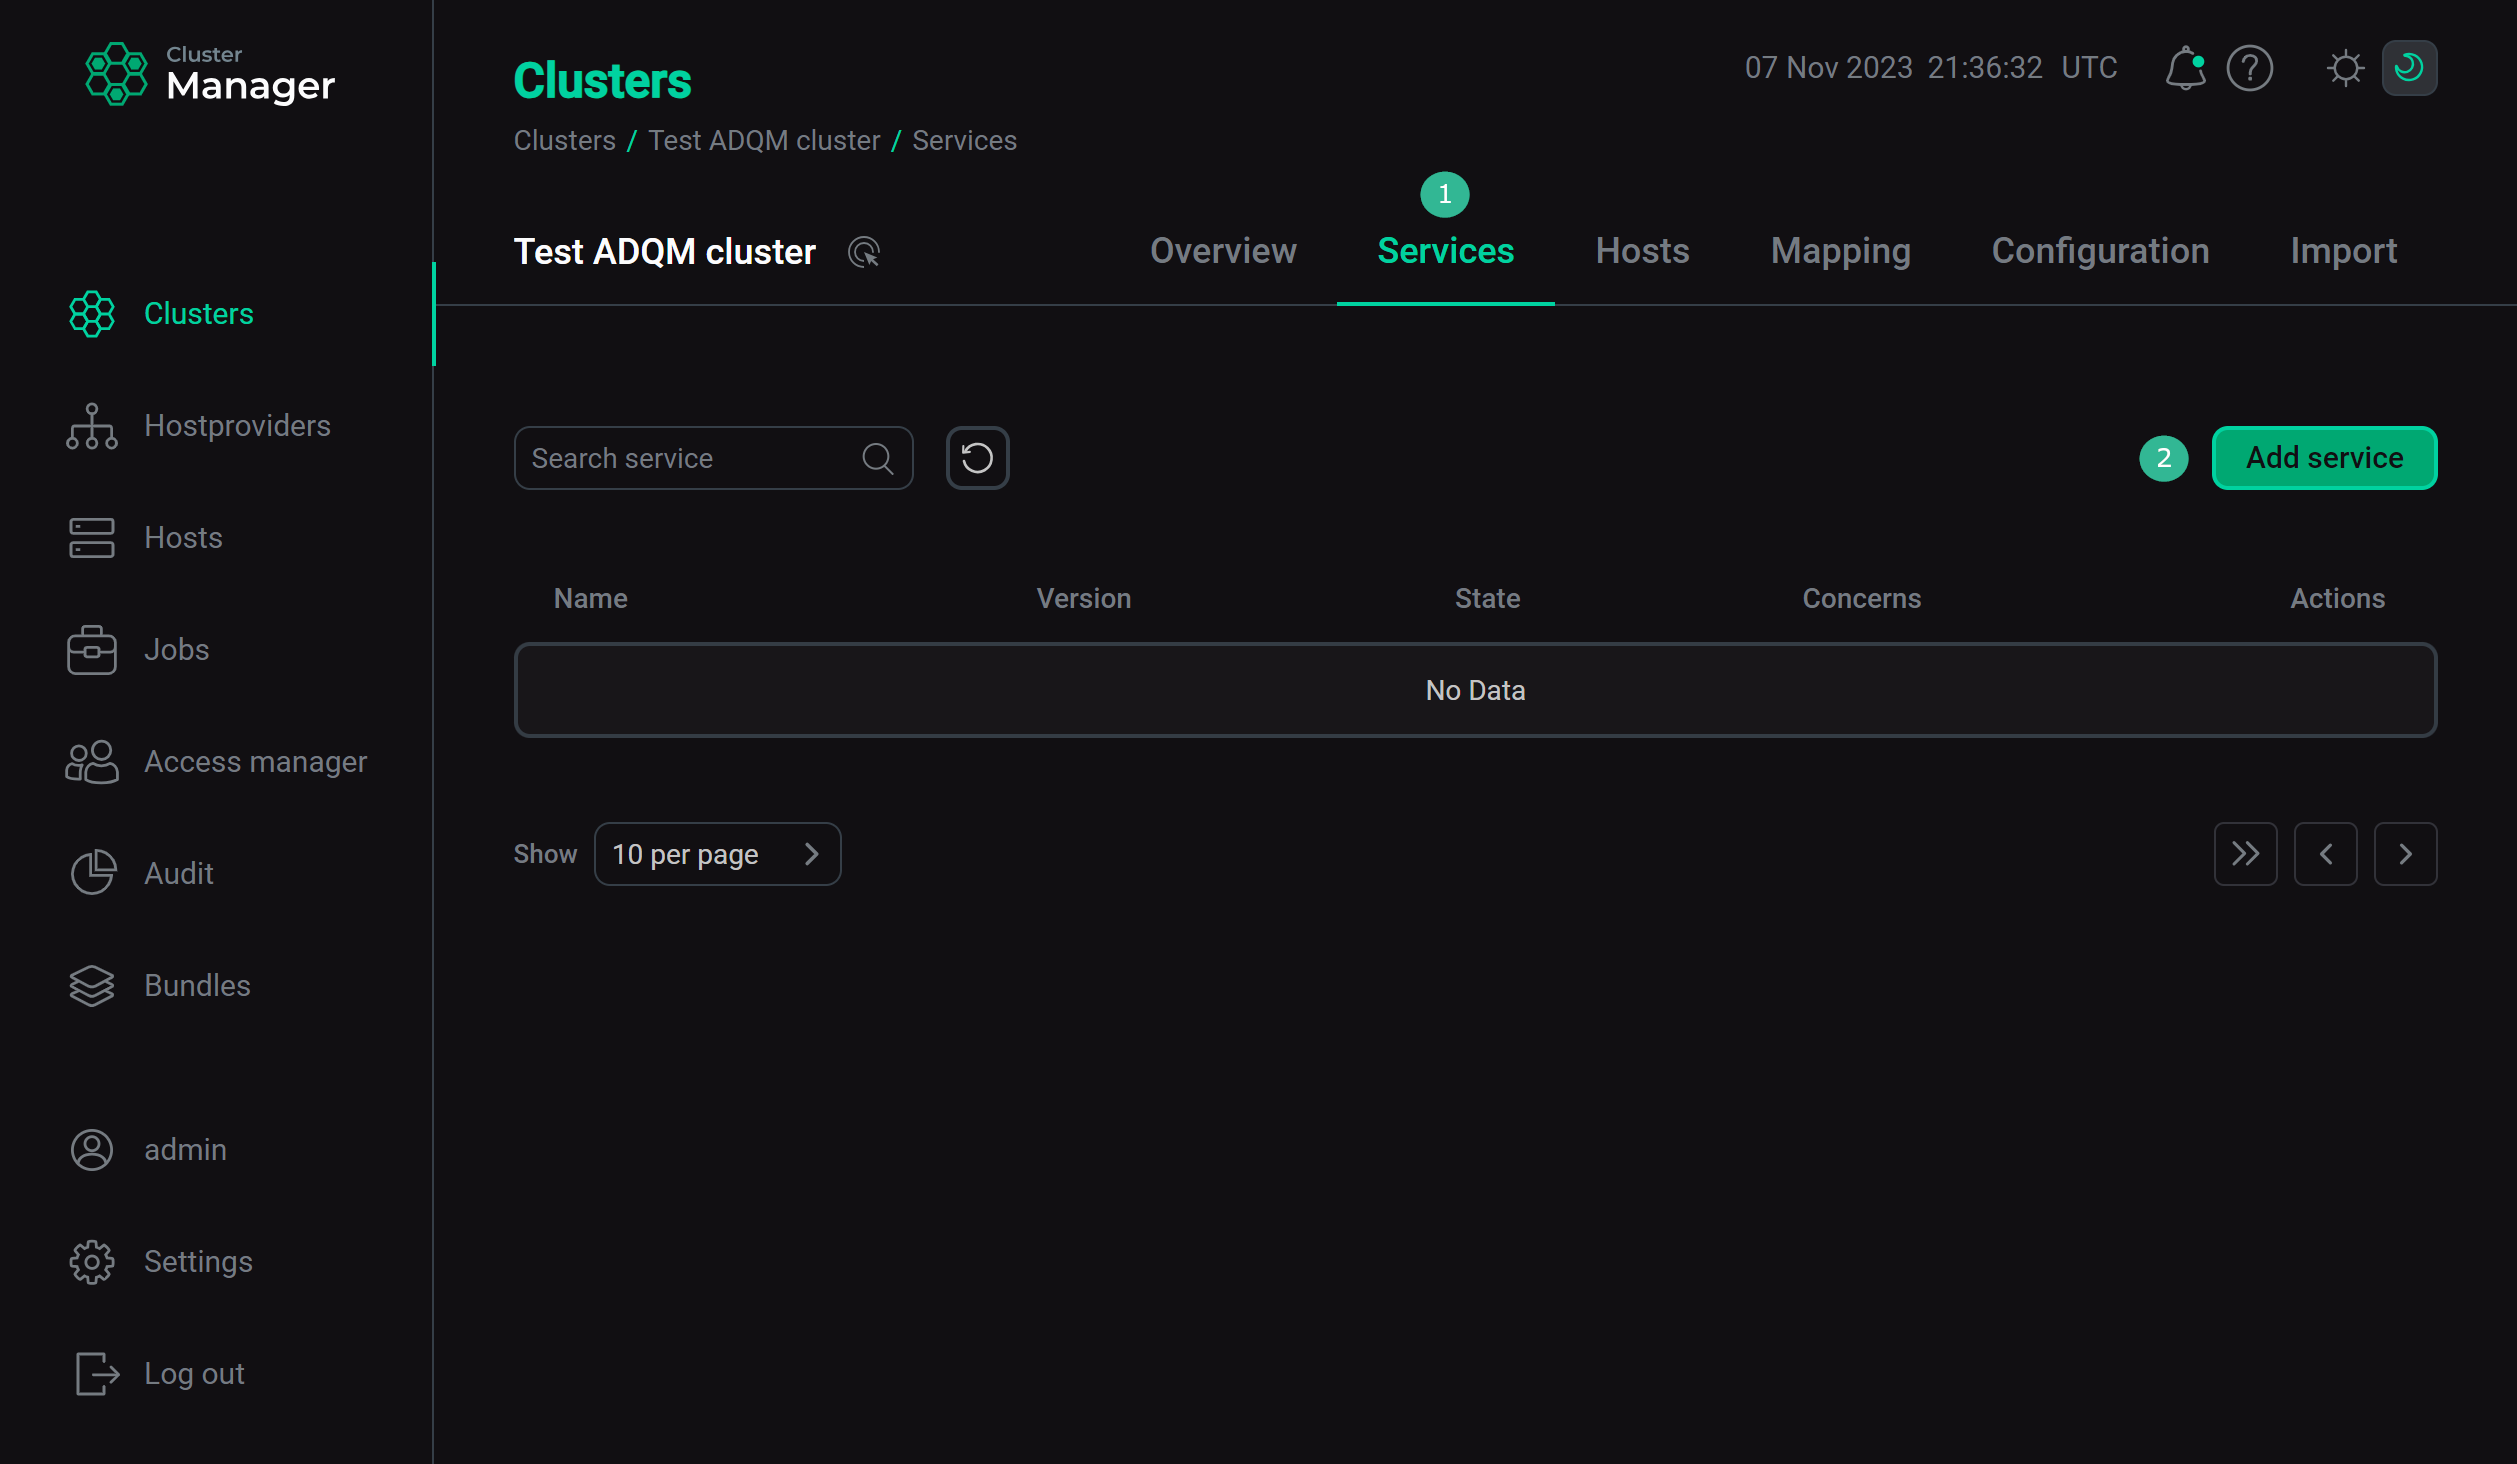 adcm services to cluster 01